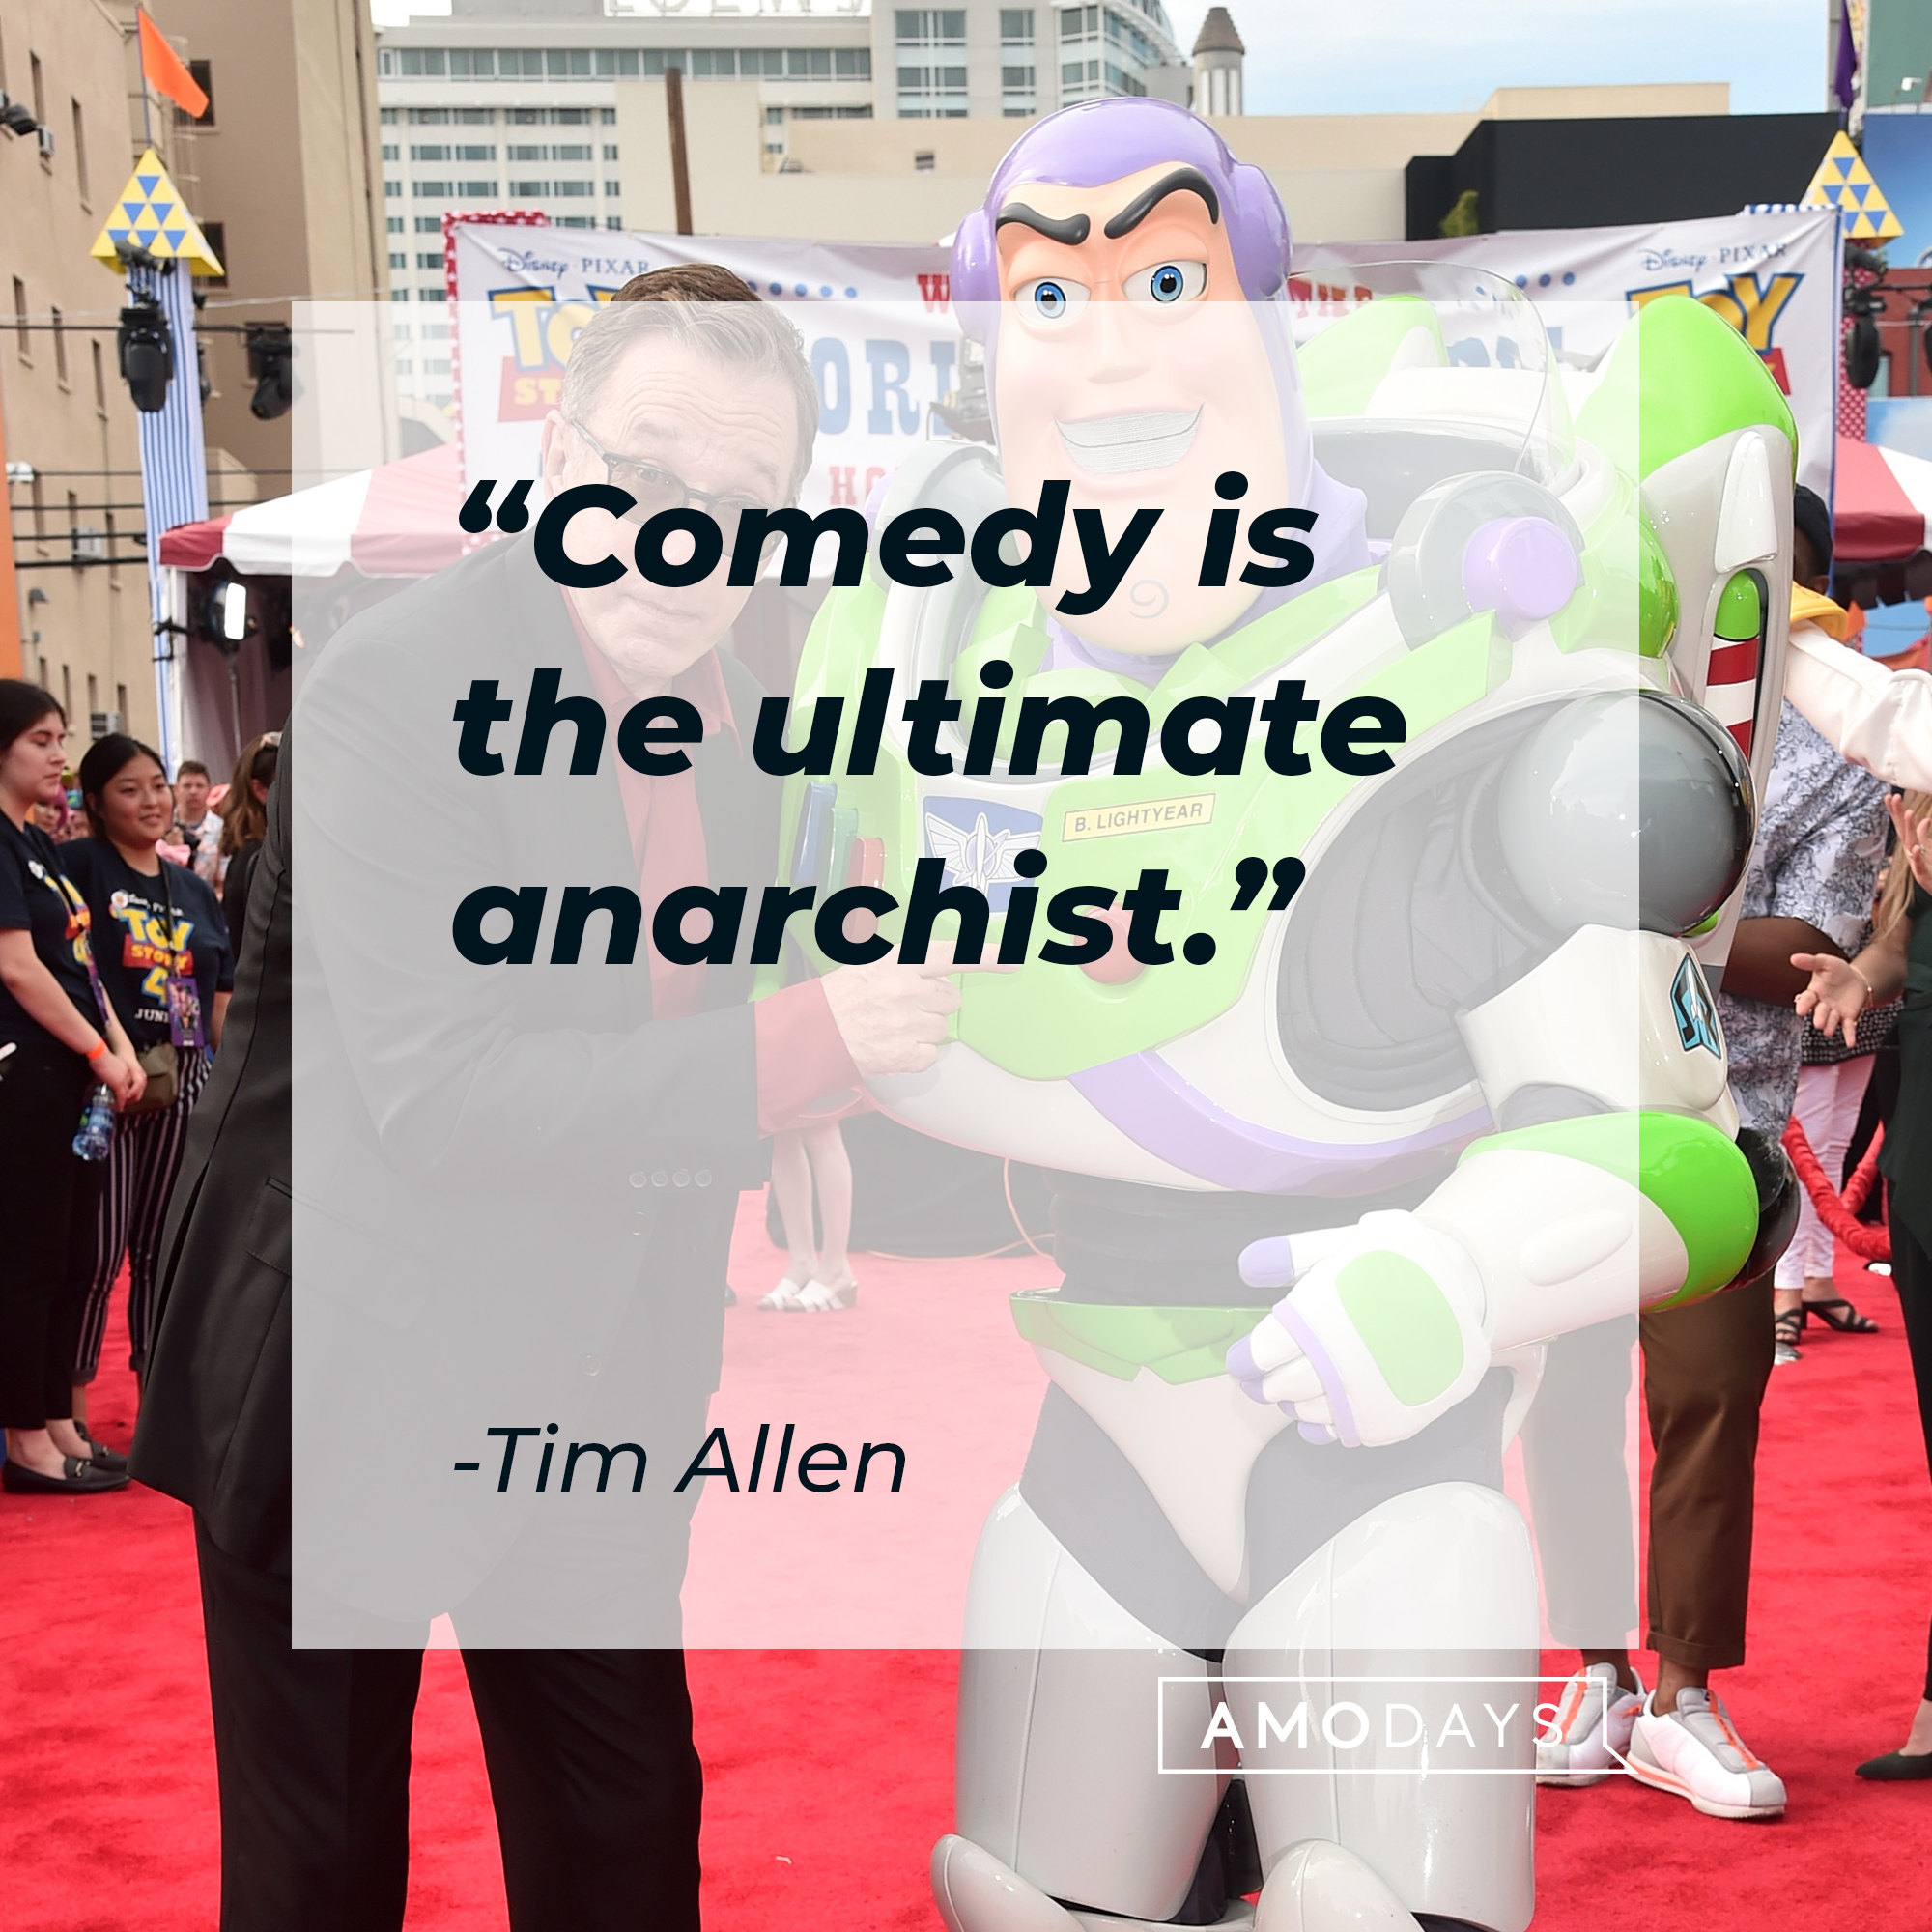 An image of Tim Allen, with his quote: “Comedy is the ultimate anarchist.”┃Source: Getty Images